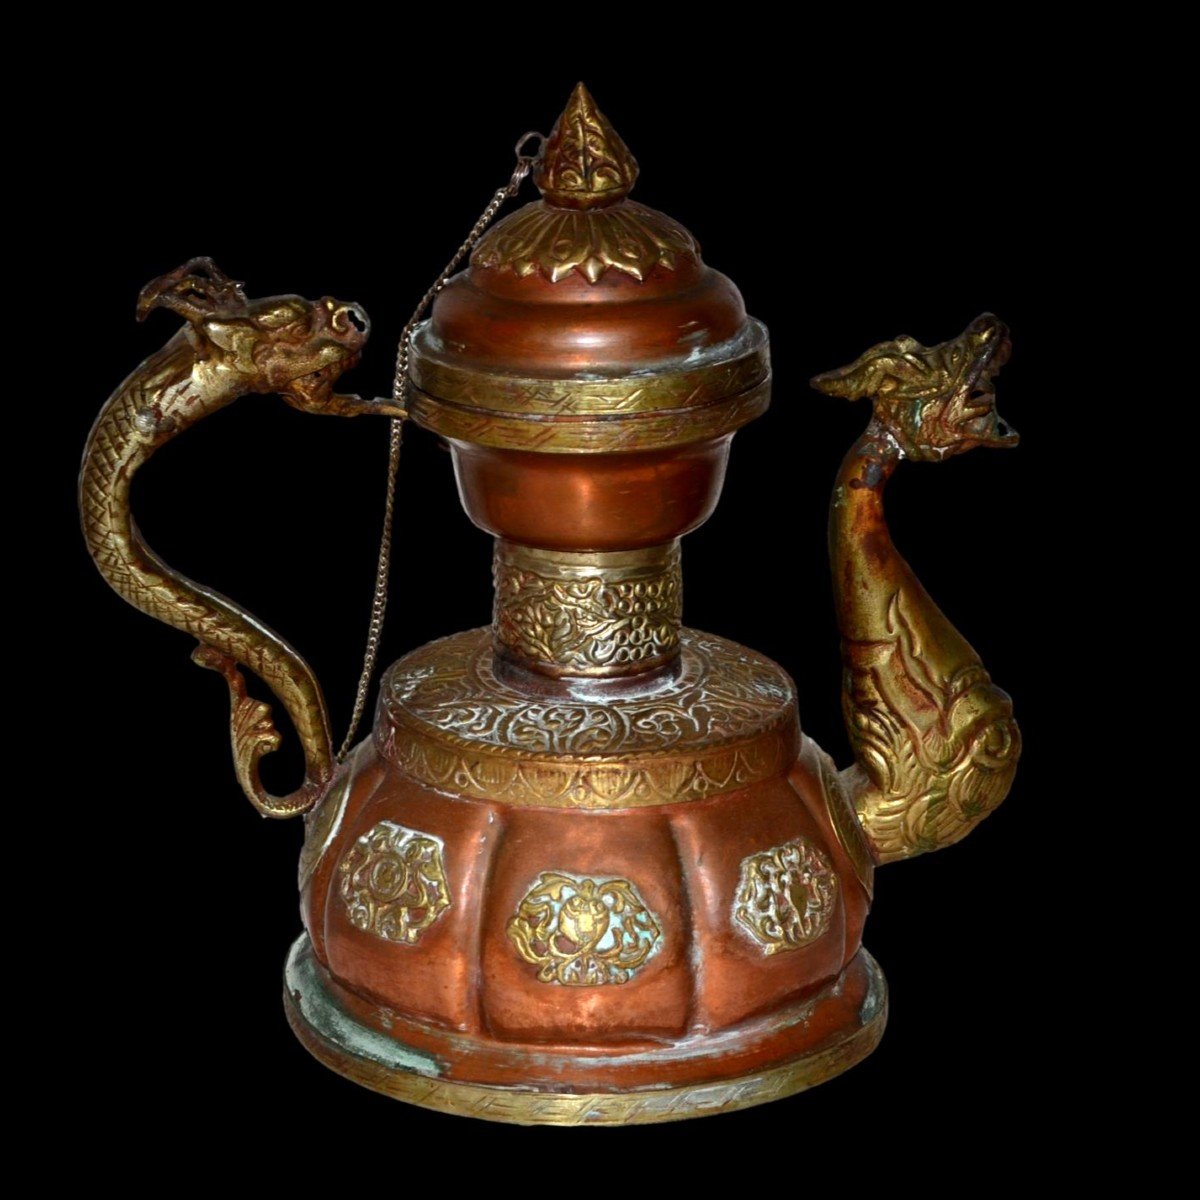 Teapot With Dragons, Tibet, Signs Of Good Omens, Circa 1920/1930 In Collectible Condition-photo-2